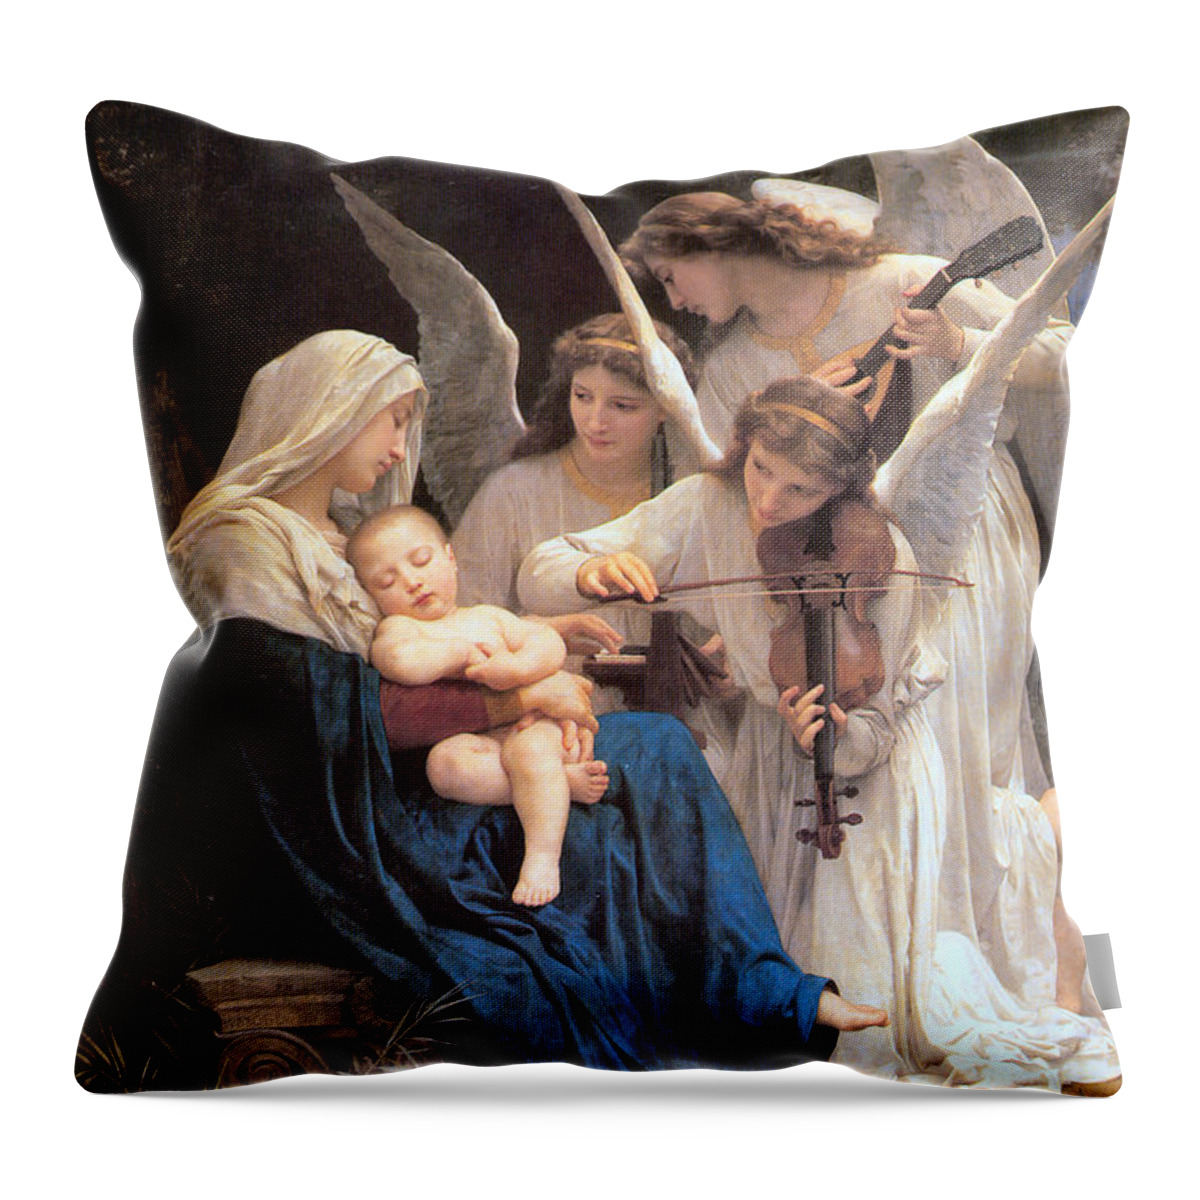 The Virgin With Angels Throw Pillow featuring the digital art The Virgin With Angels #2 by William Bouguereau